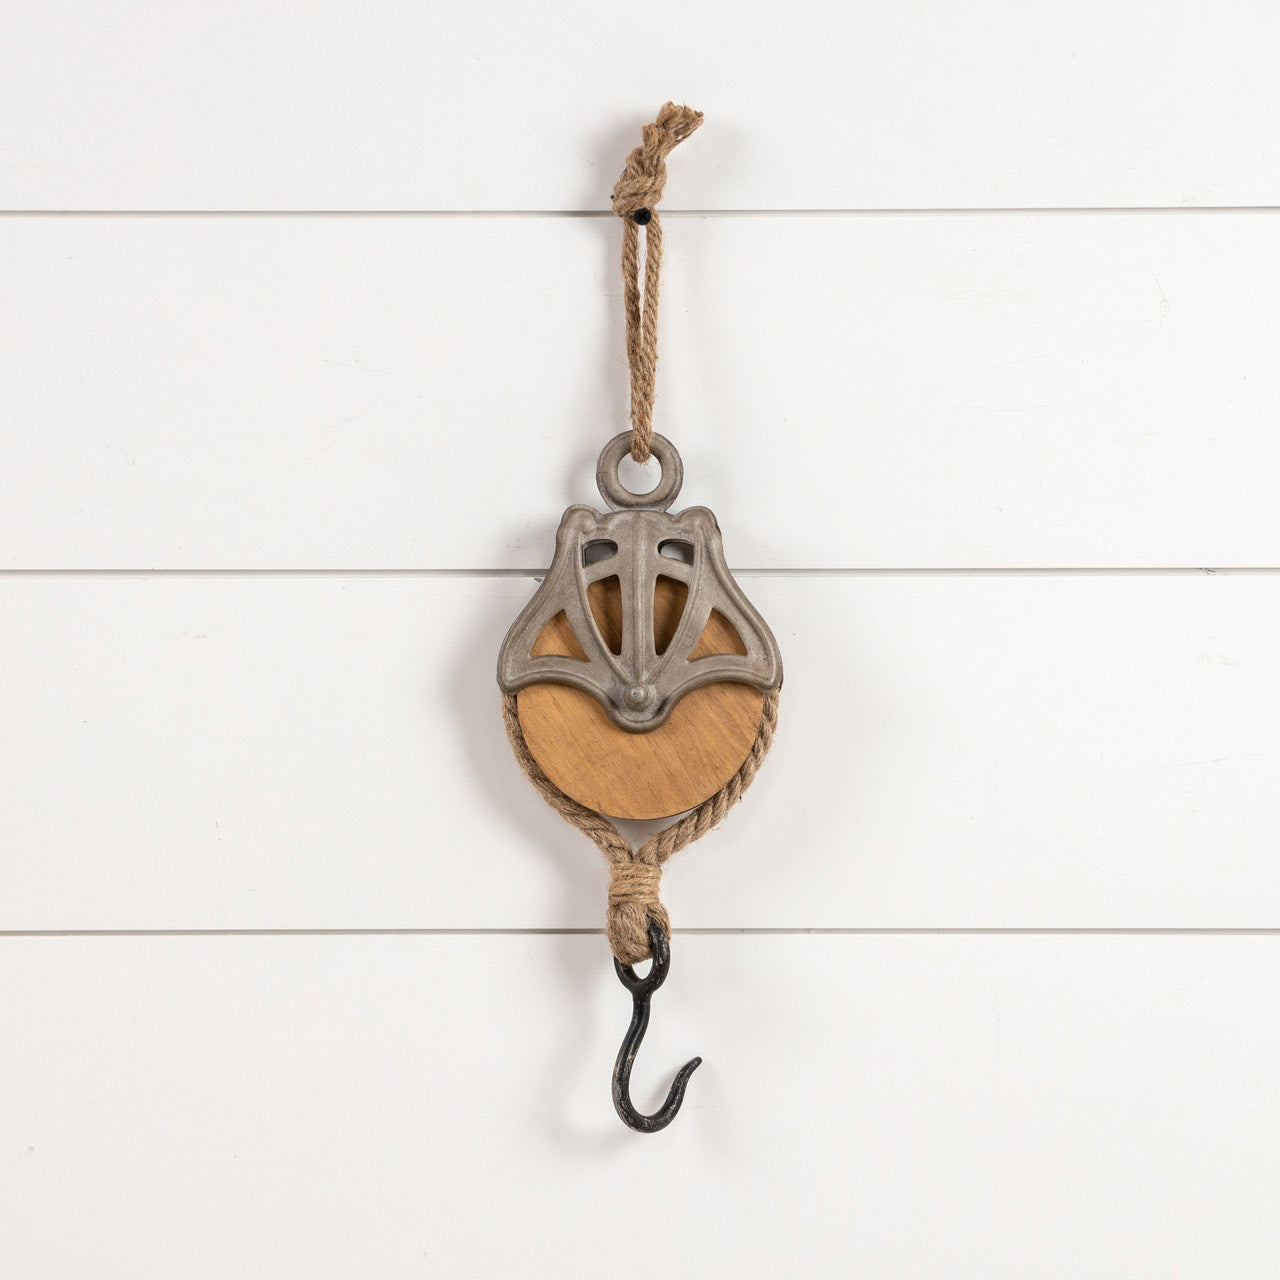 Wooden Wheel Pulley with Hook